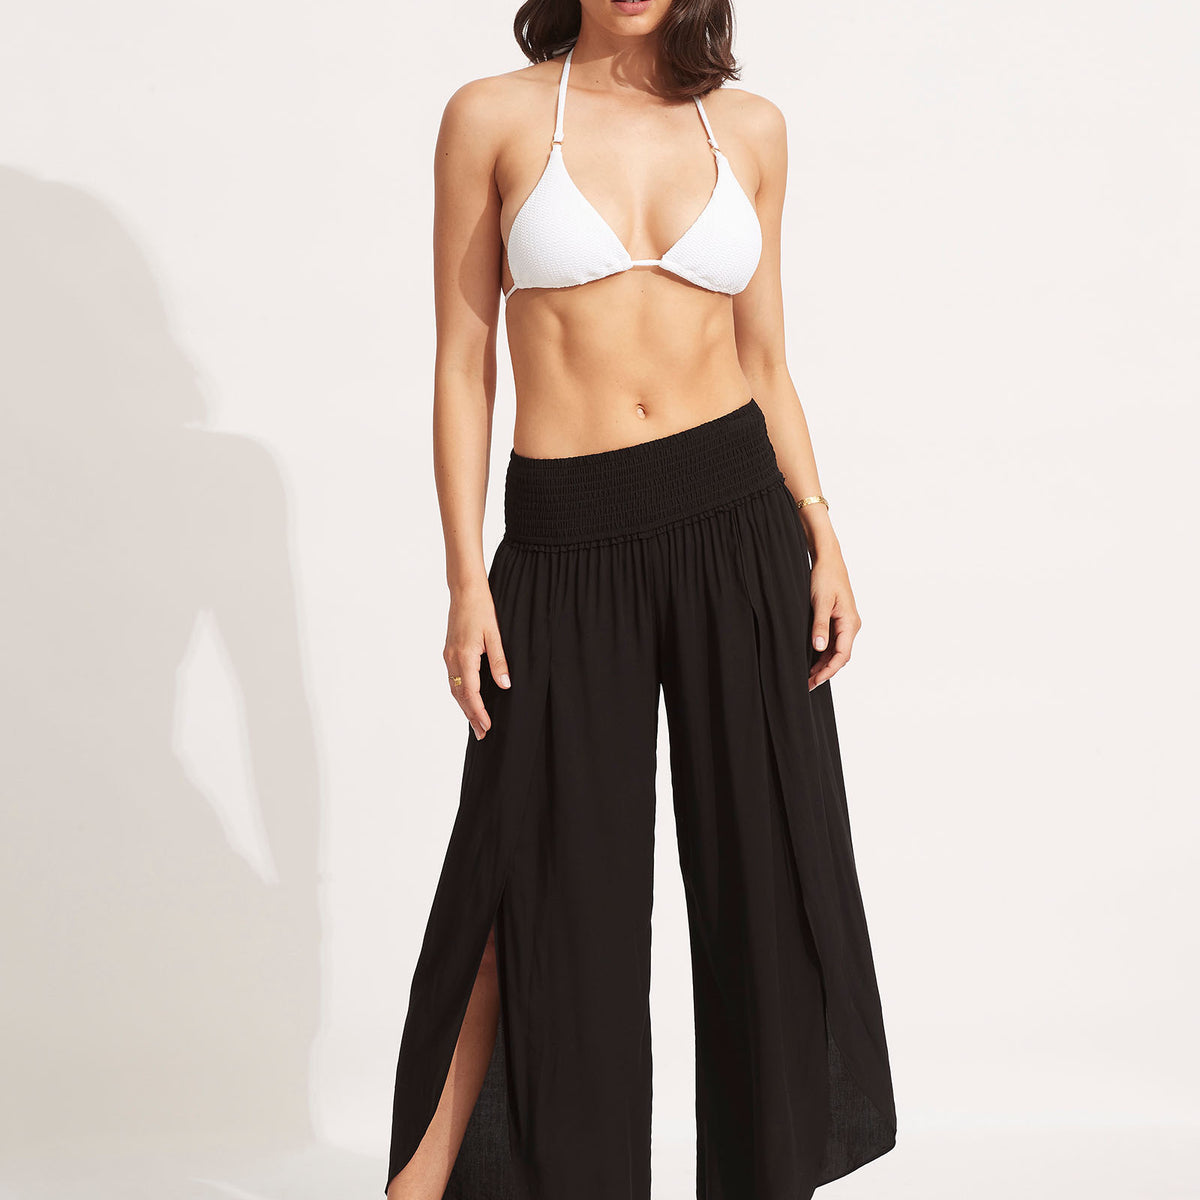 Seafolly SF Collective High Waist Wrap Front Pant in Black – Sandpipers